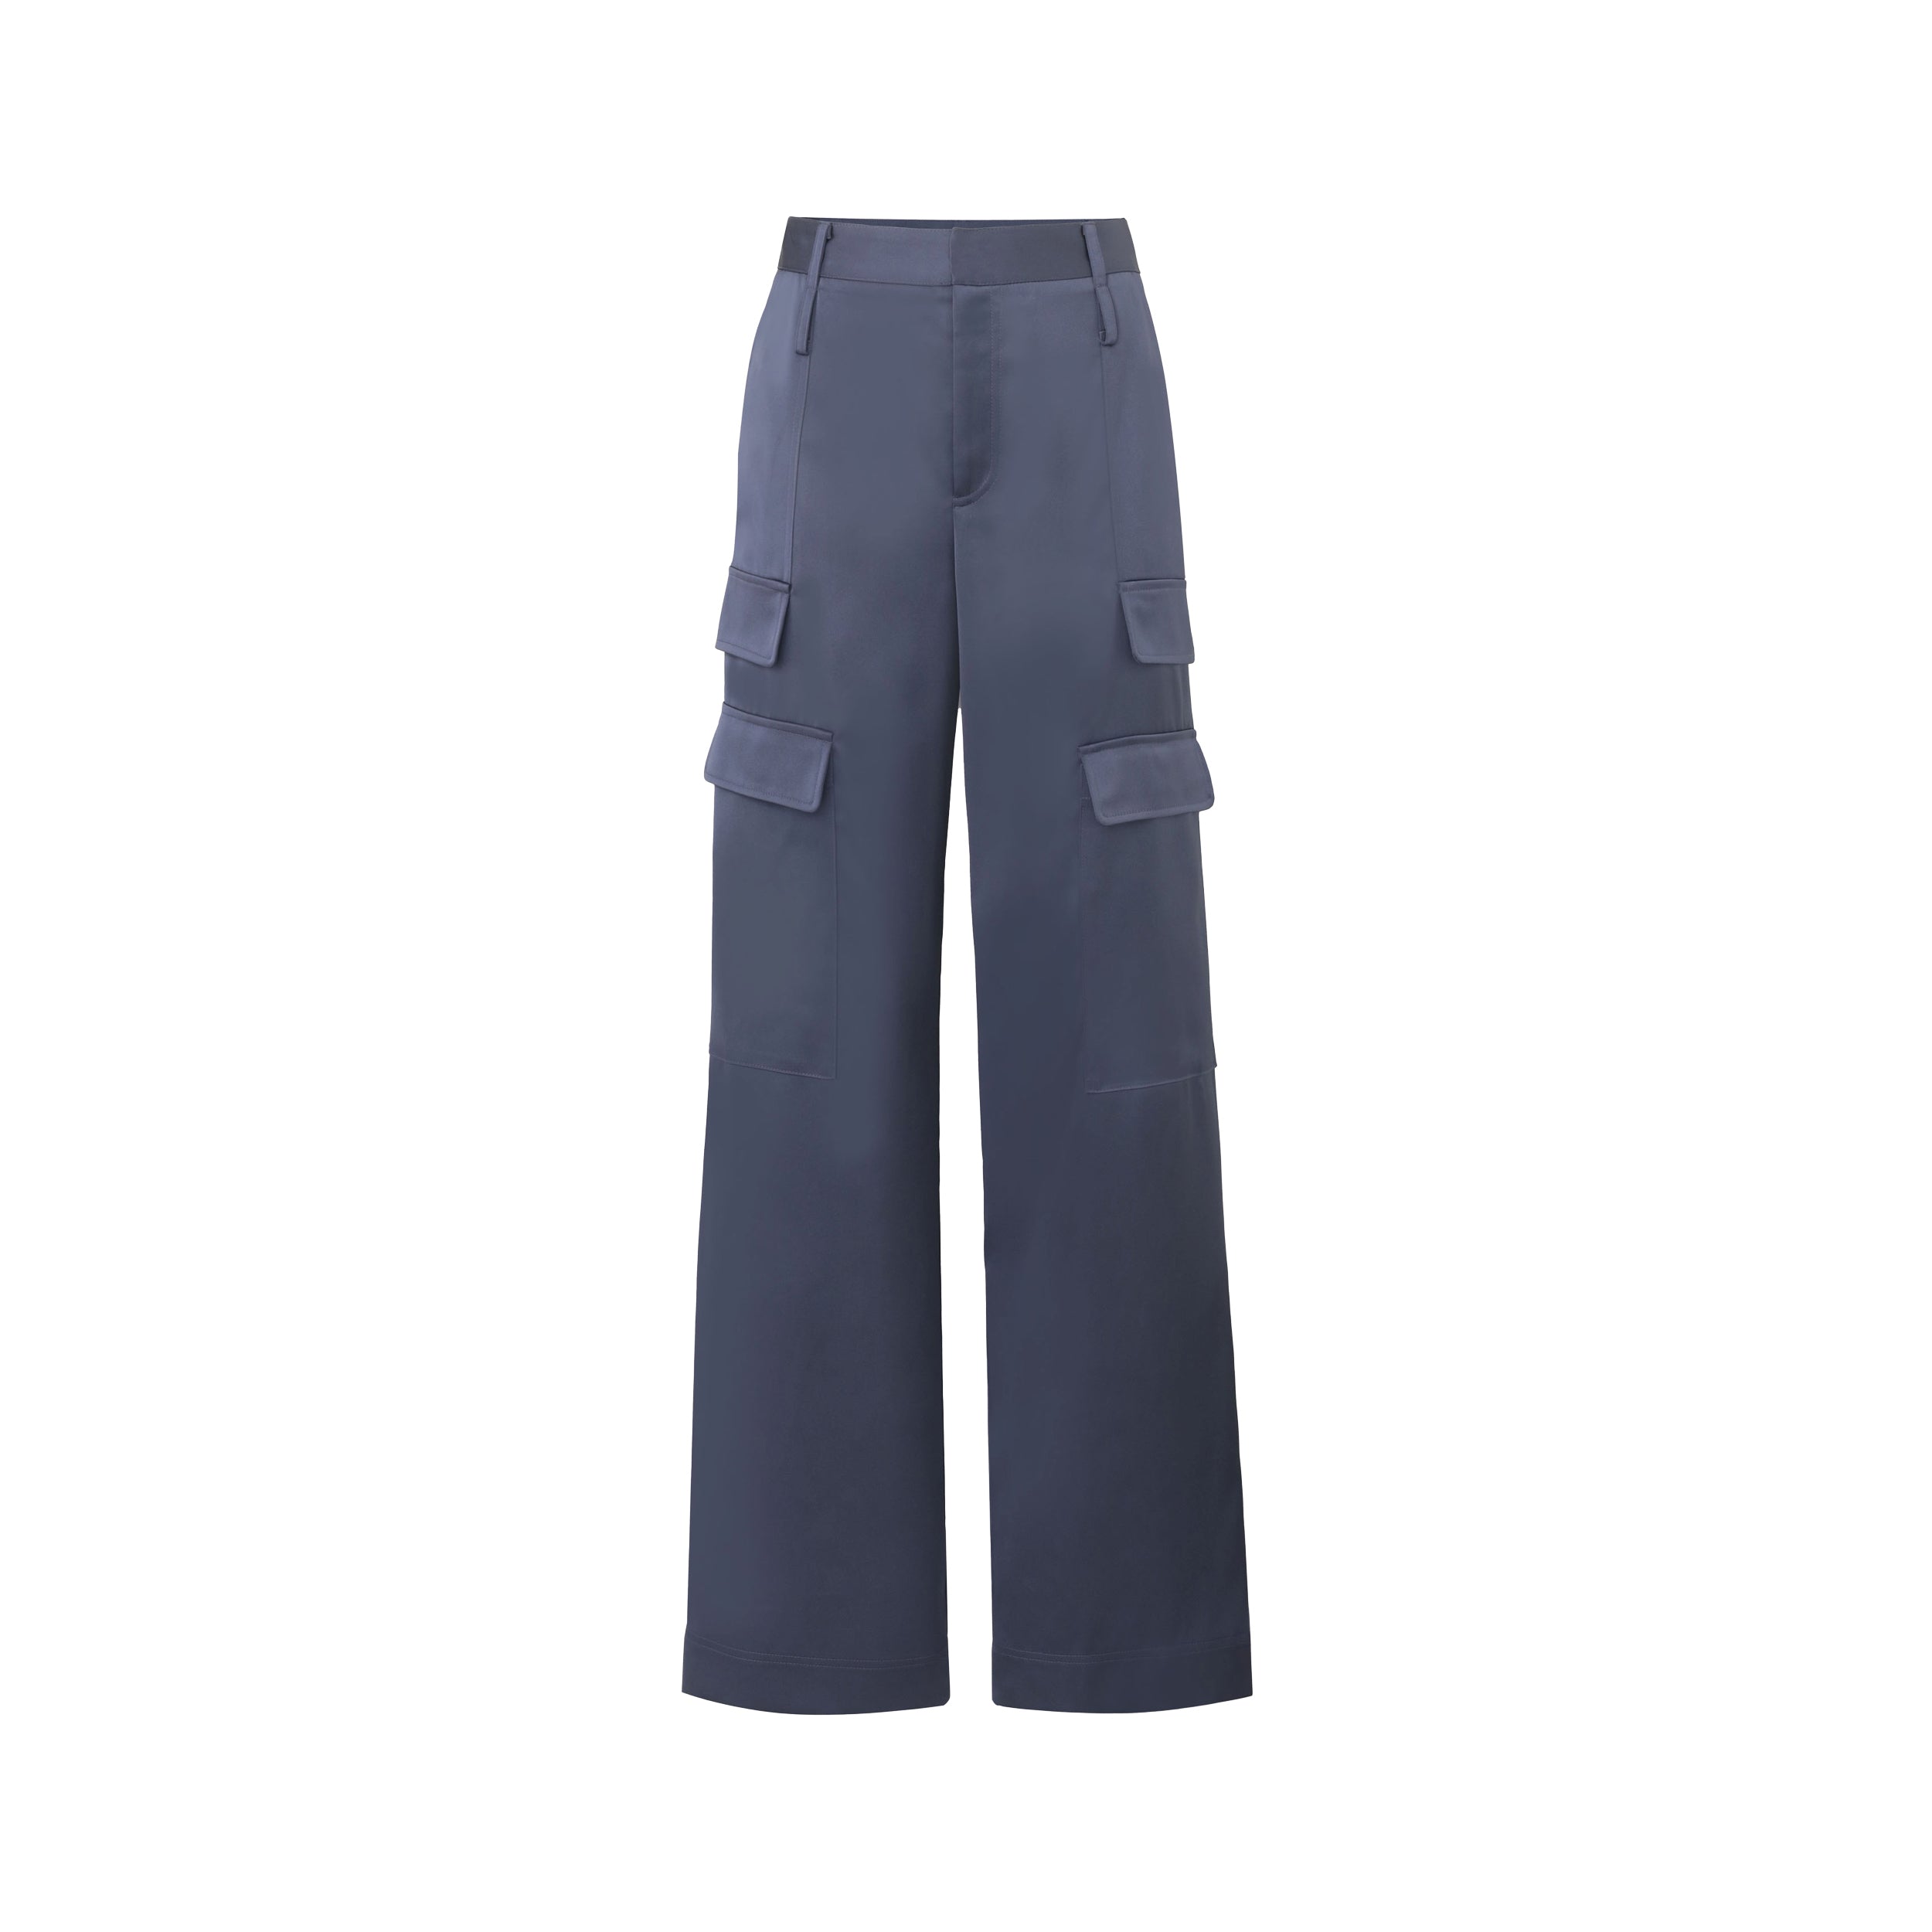 Product view of Navy Satin Milan Pant features Mid-rise with side pockets and cargo detail. Luxurious and structured satin-like fabric. 